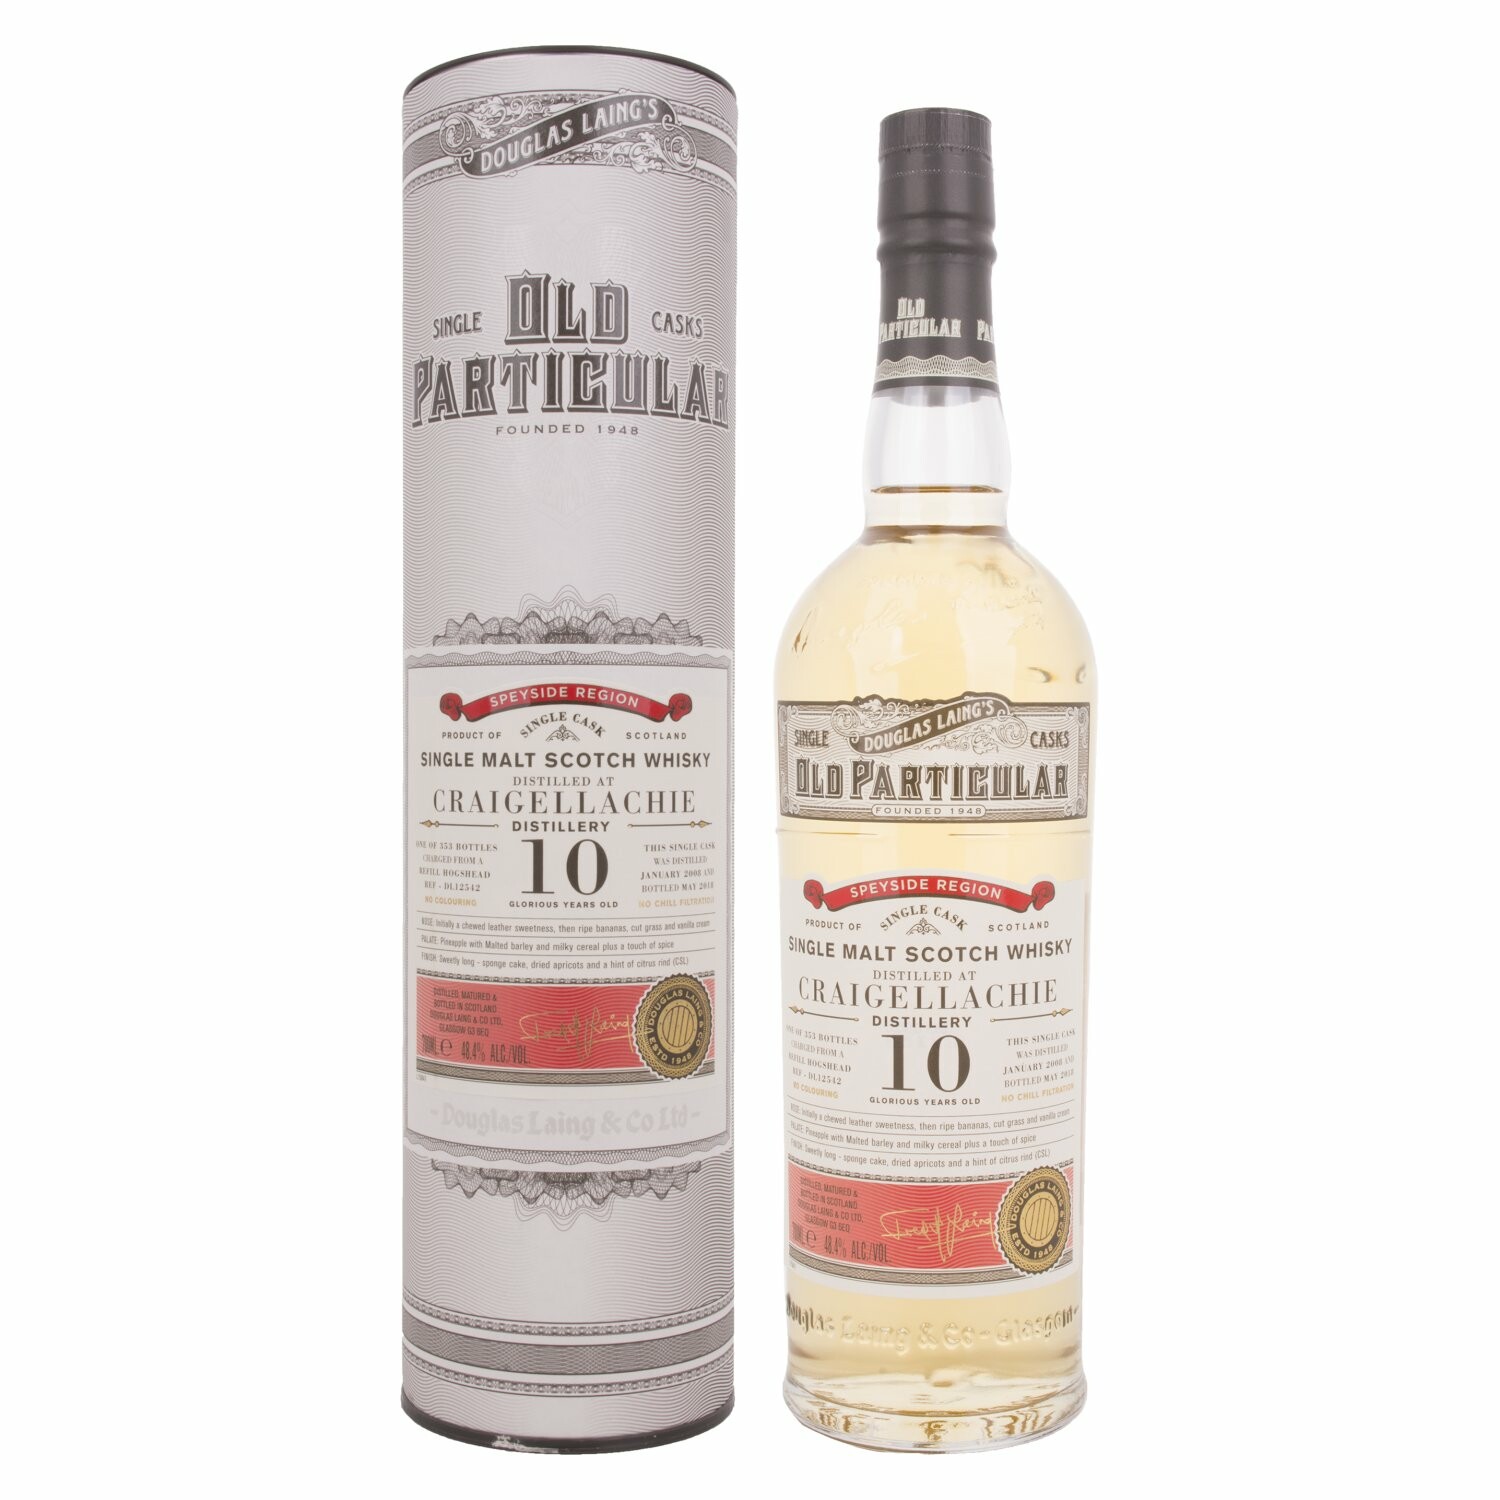 Douglas Laing OLD PARTICULAR Craigellachie 10 Years Old Single Cask Malt 2008 48,4% Vol. 0,7l in Giftbox